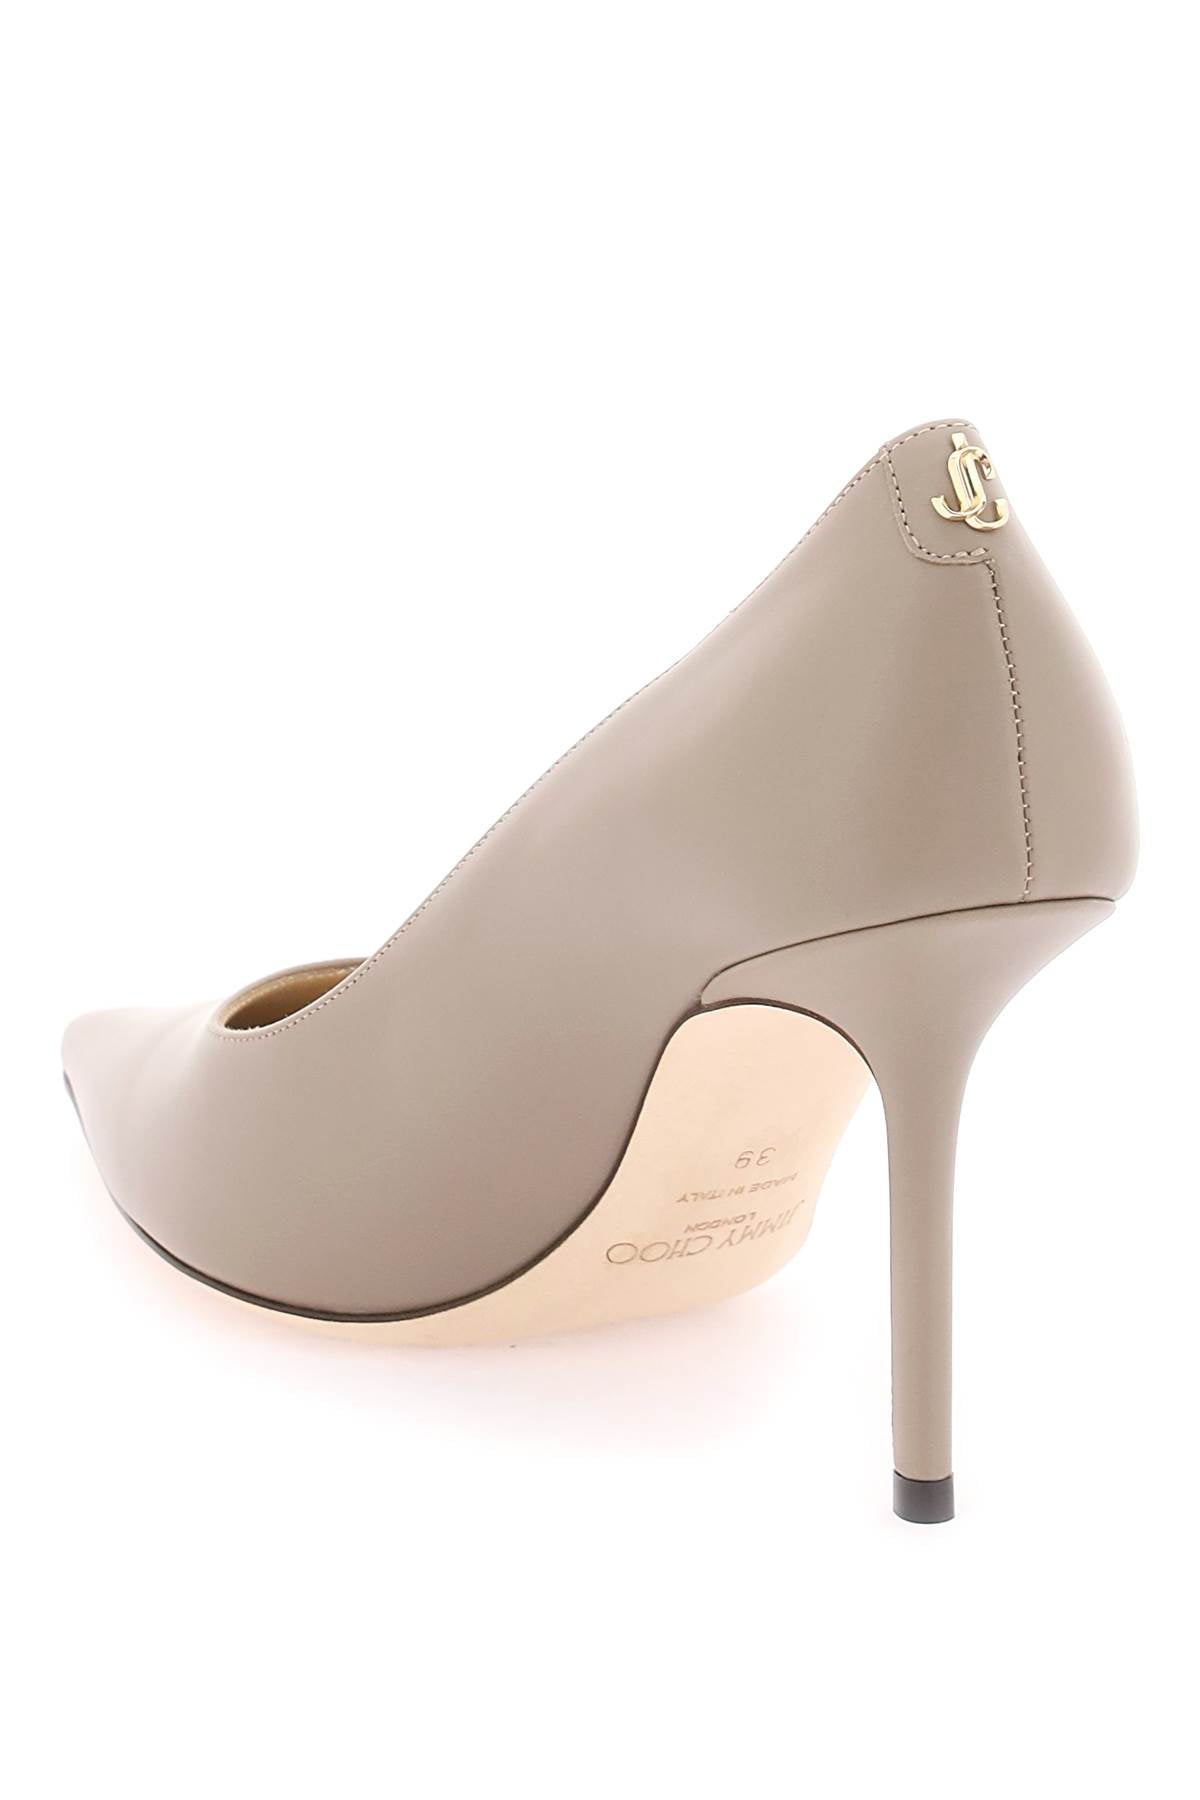 JIMMY CHOO Elegant Beige Leather Pumps with Golden Metal Logo and Leather Sole